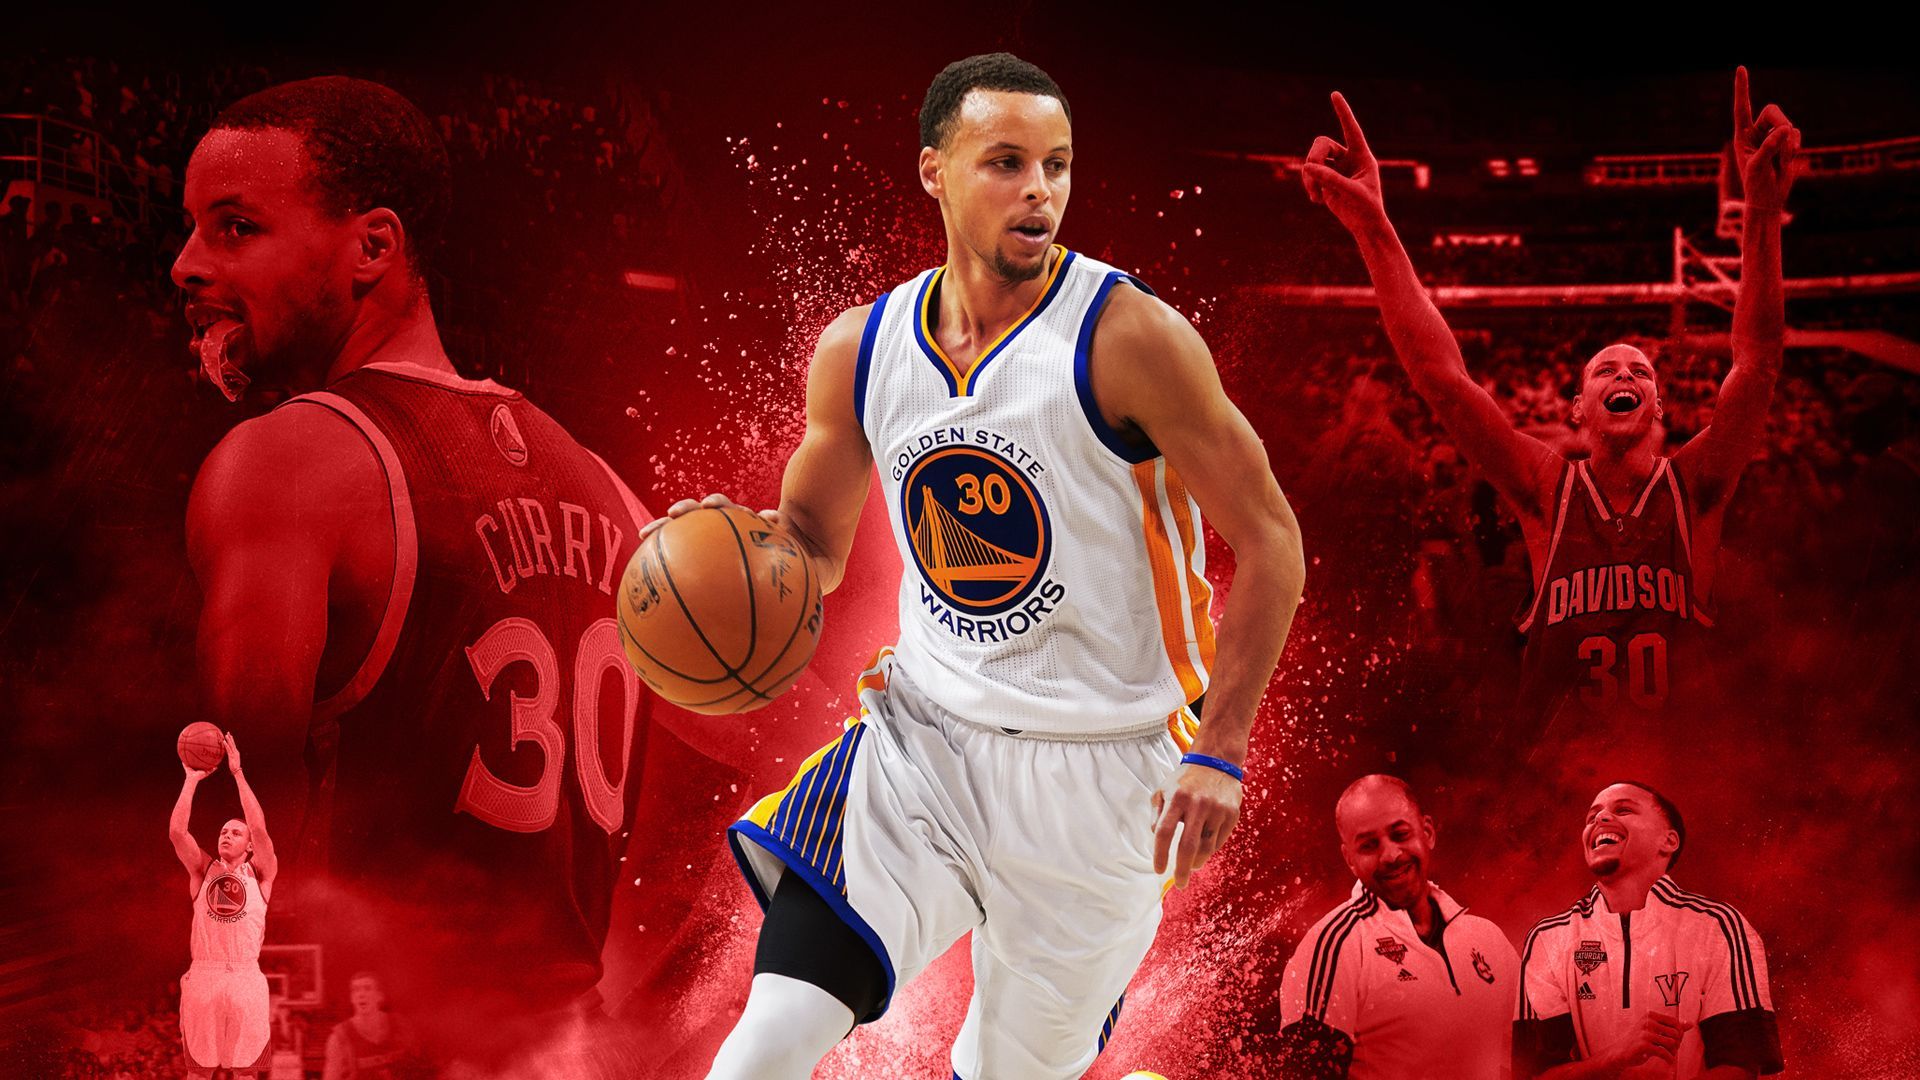 NBA 2K16 Apk: Download the APK For Android & PC Latest Version